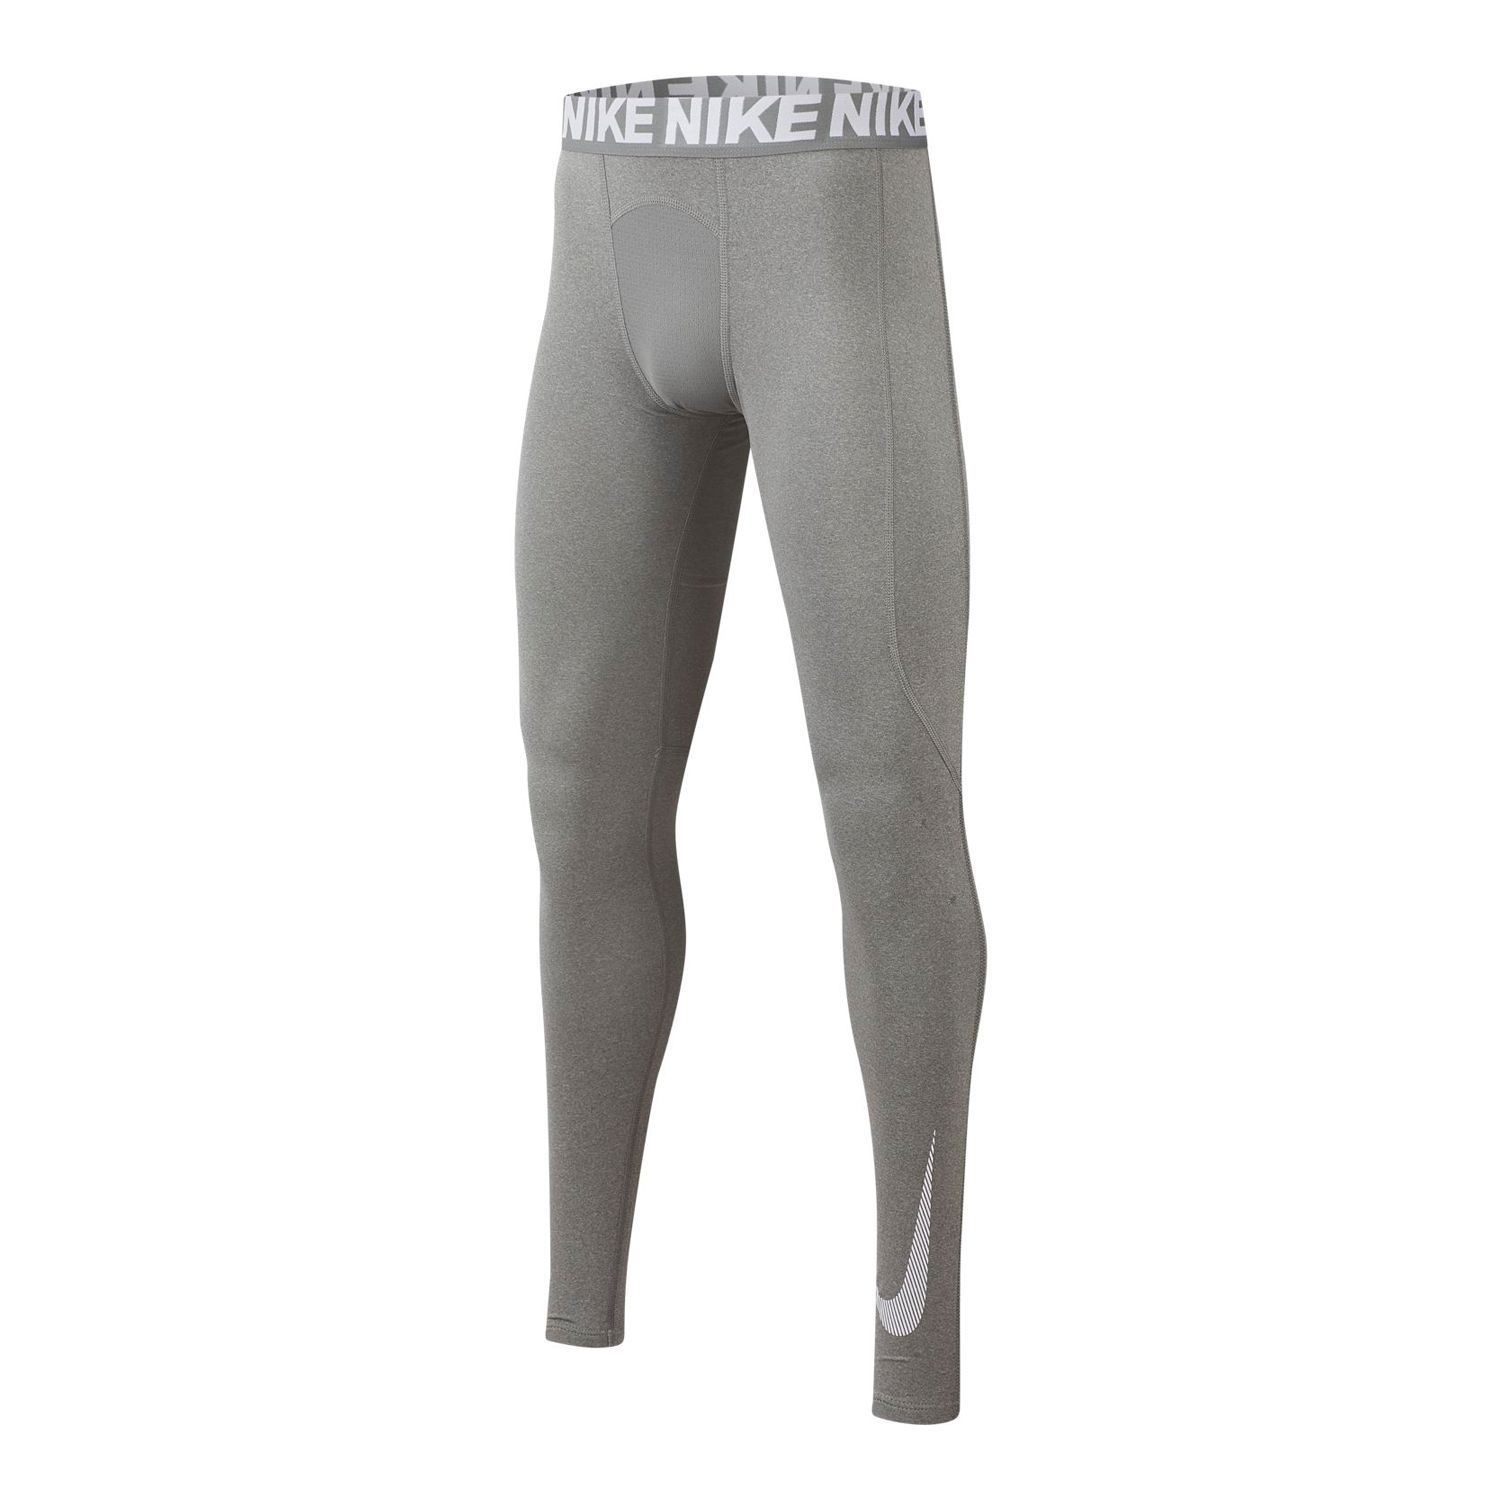 nike youth tights